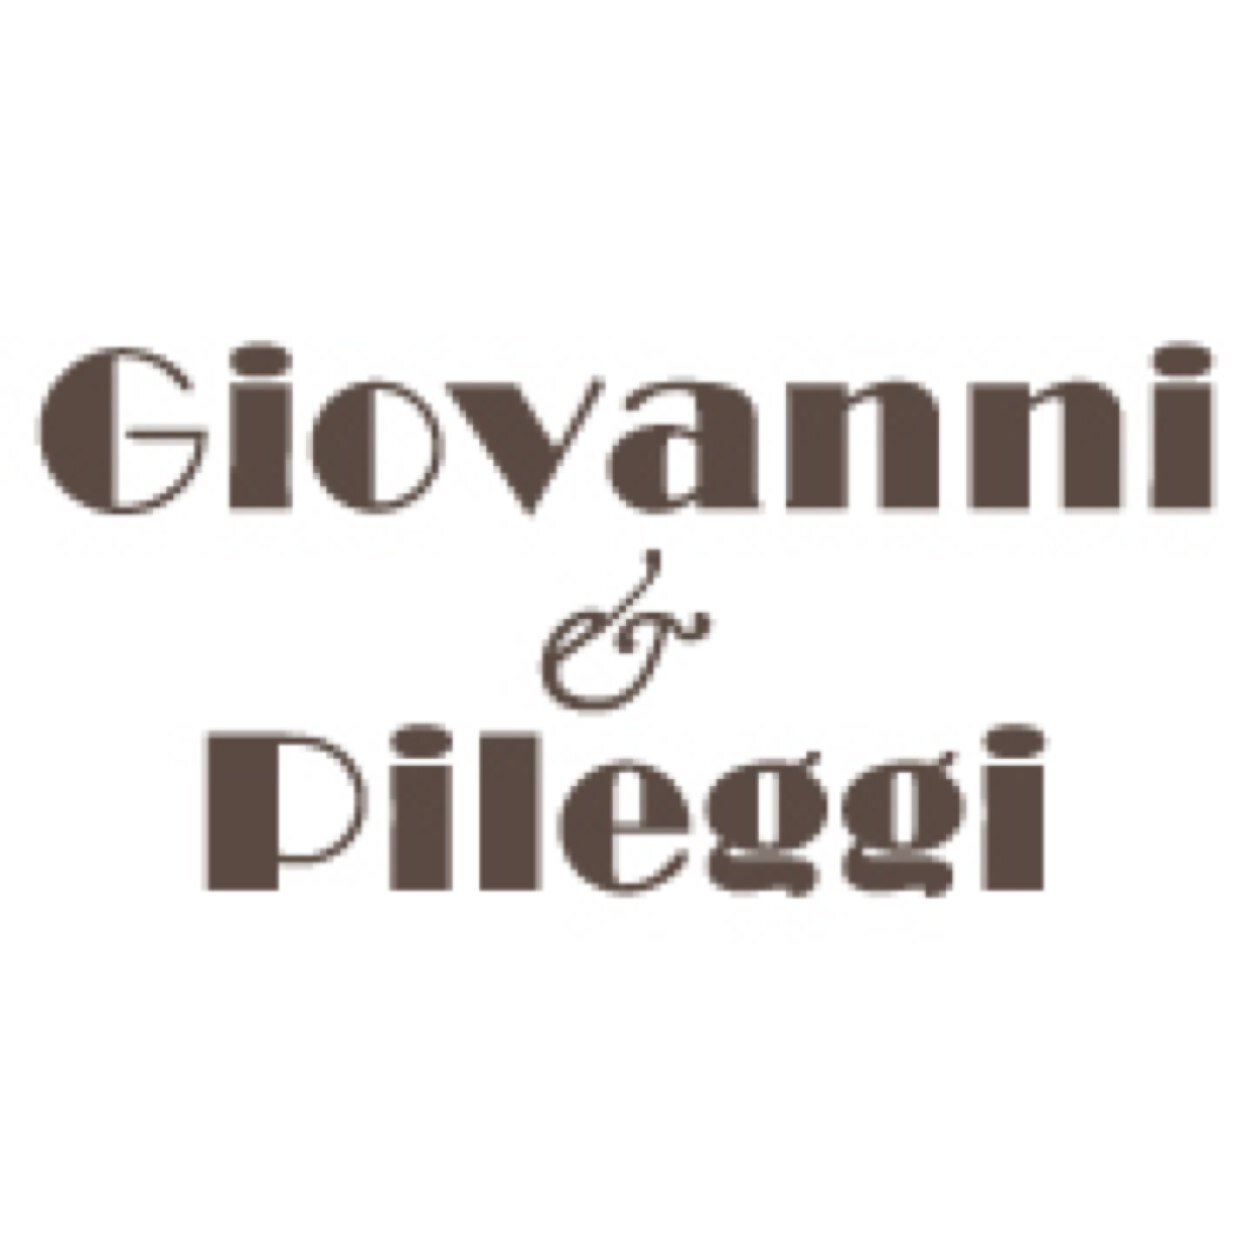 Giovanni & Pileggi in Midtown Village is home to a remarkable team of creative and talented stylists offering superior cuts, color, makeup, and more!